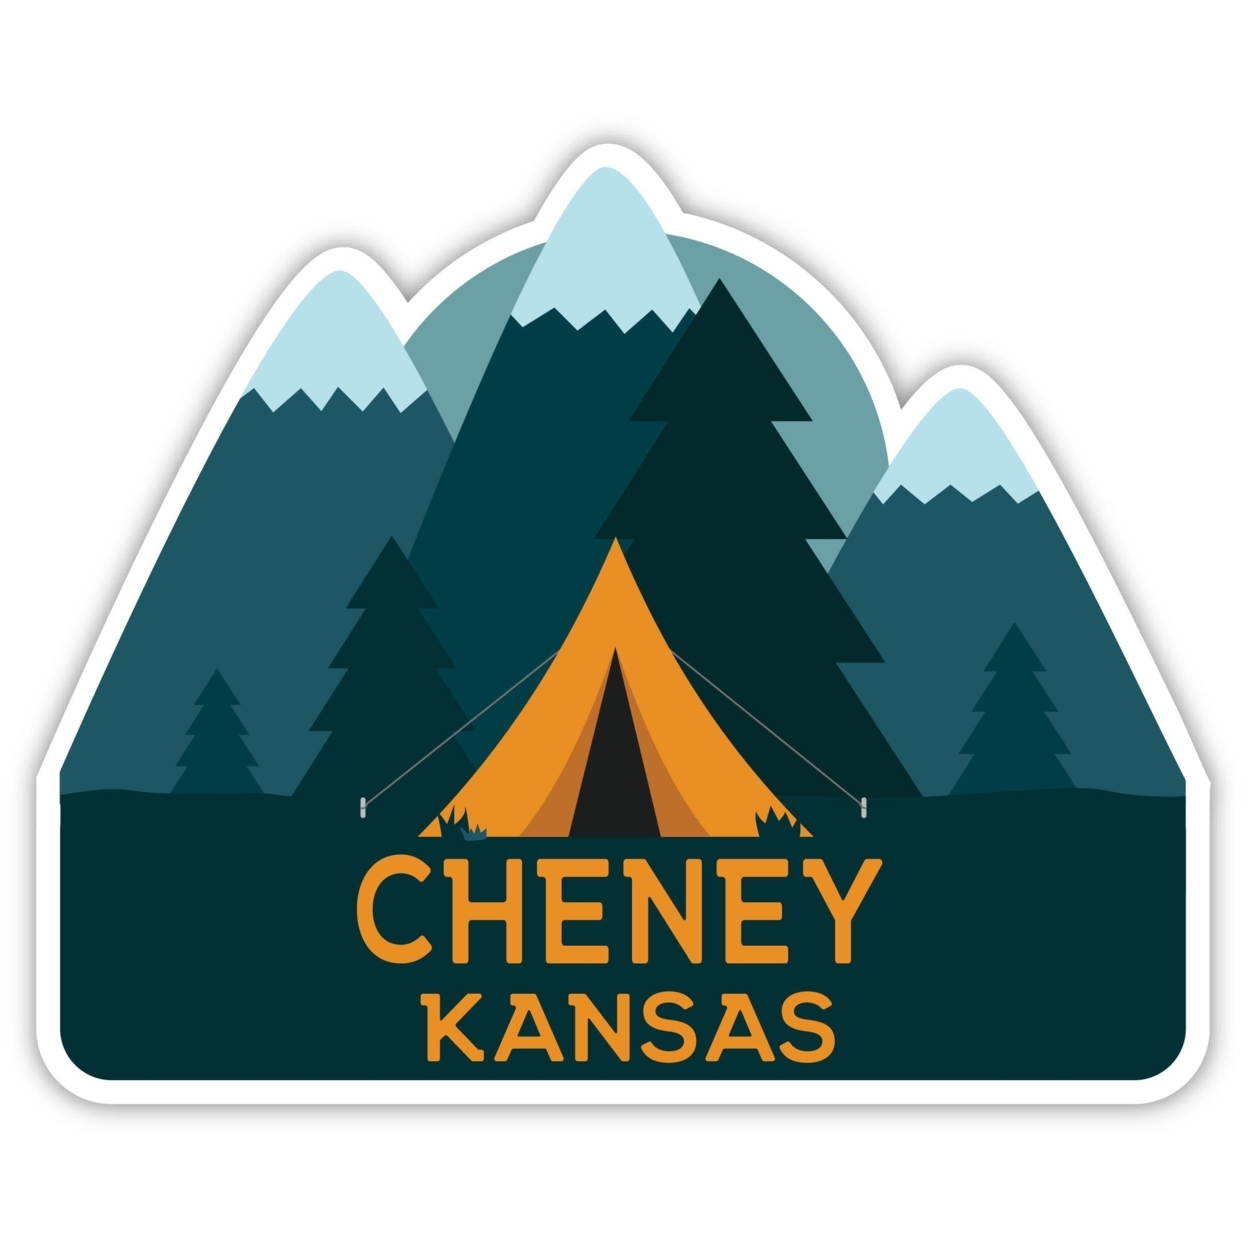 Cheney Kansas Souvenir Decorative Stickers (Choose Theme And Size) - 4-Pack, 12-Inch, Tent